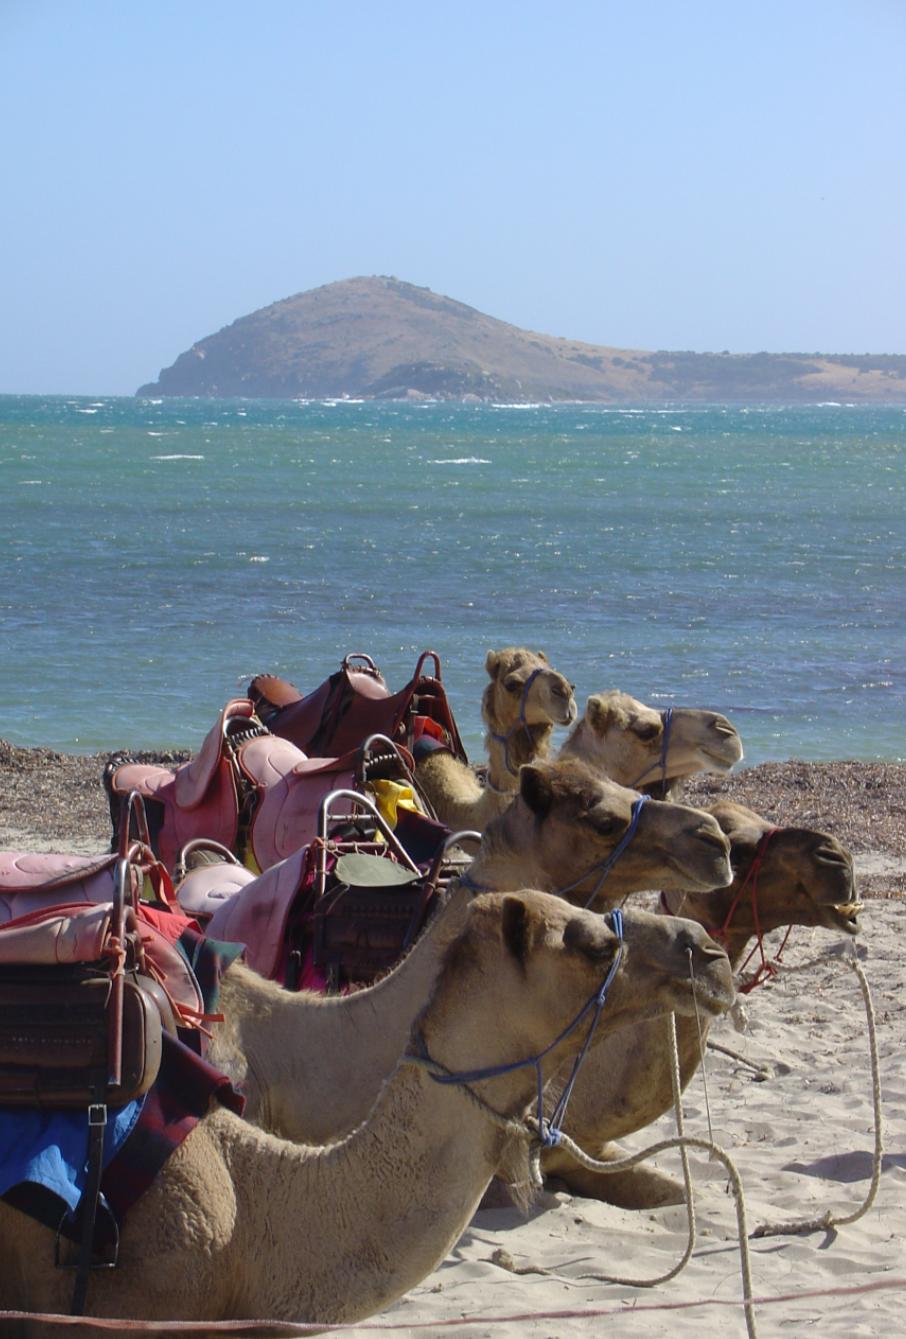 Camels rest, near Bluff, Victor Harbor